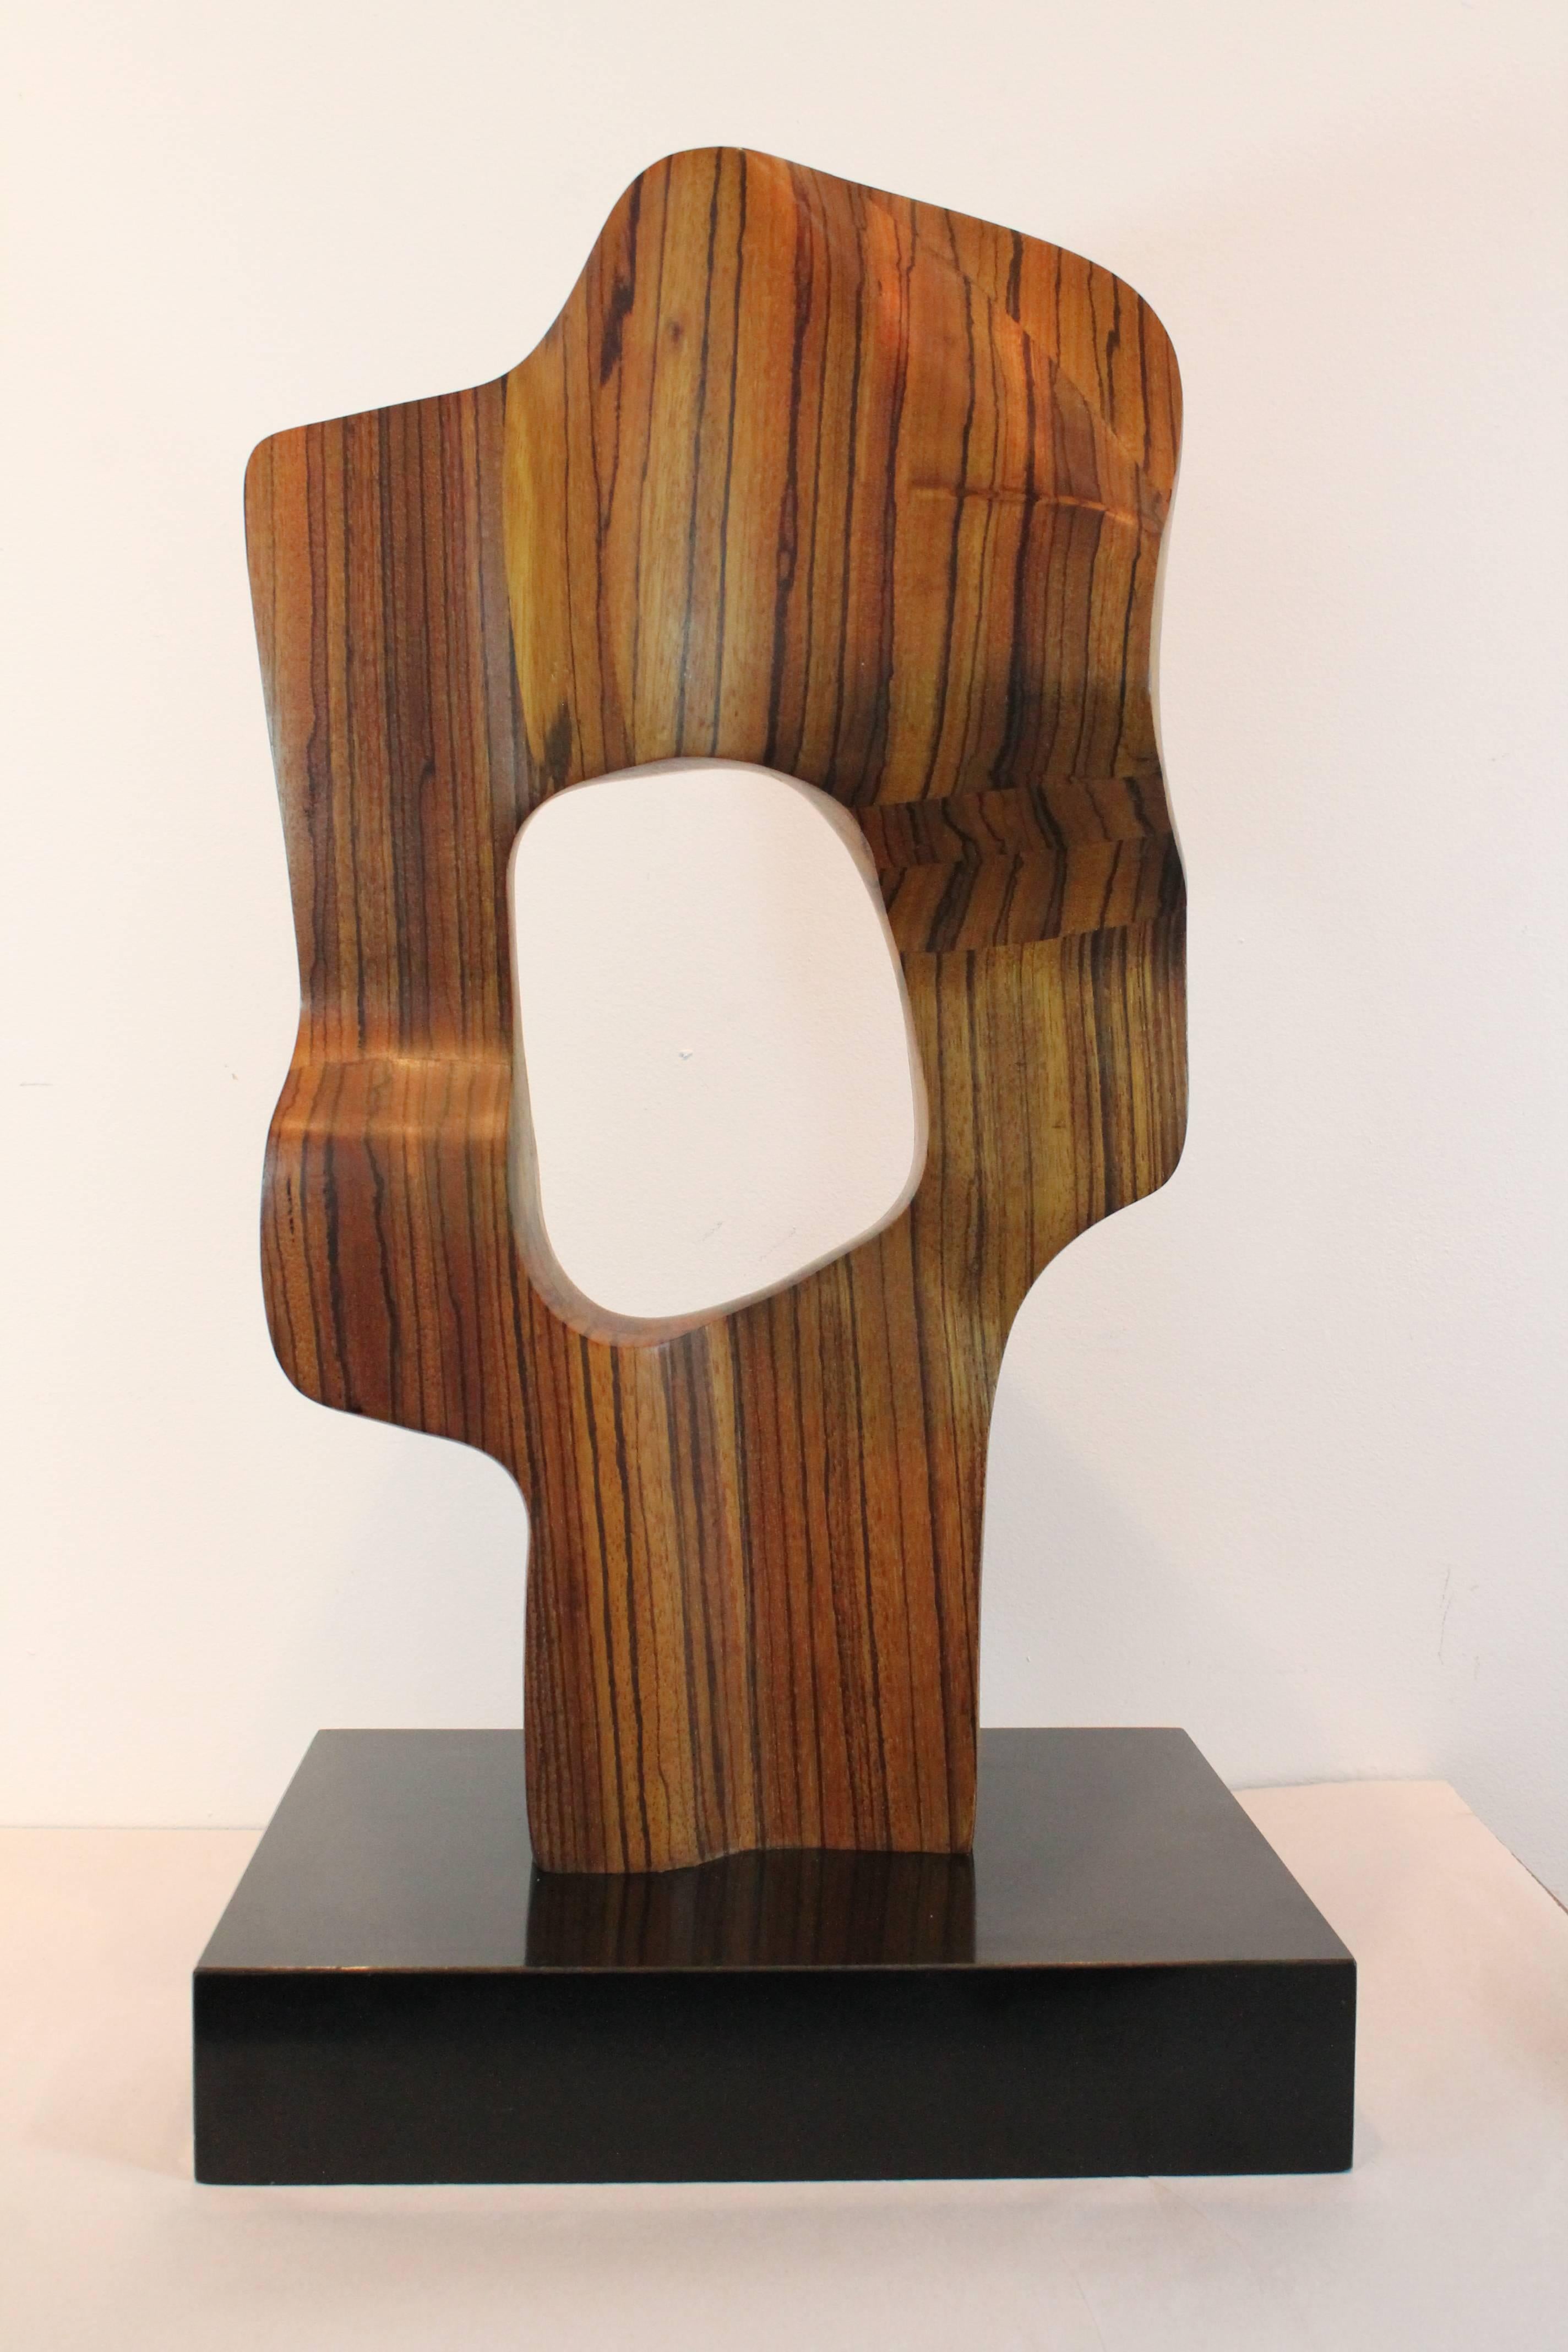 Powerful Modernist void sculpture that is incredible from every vantage.
Exceptionally constructed of zebra wood that is very precisely and sensitively executed in an organic undulating form. 
Mounted on an ebonized plinth.
Great scale.